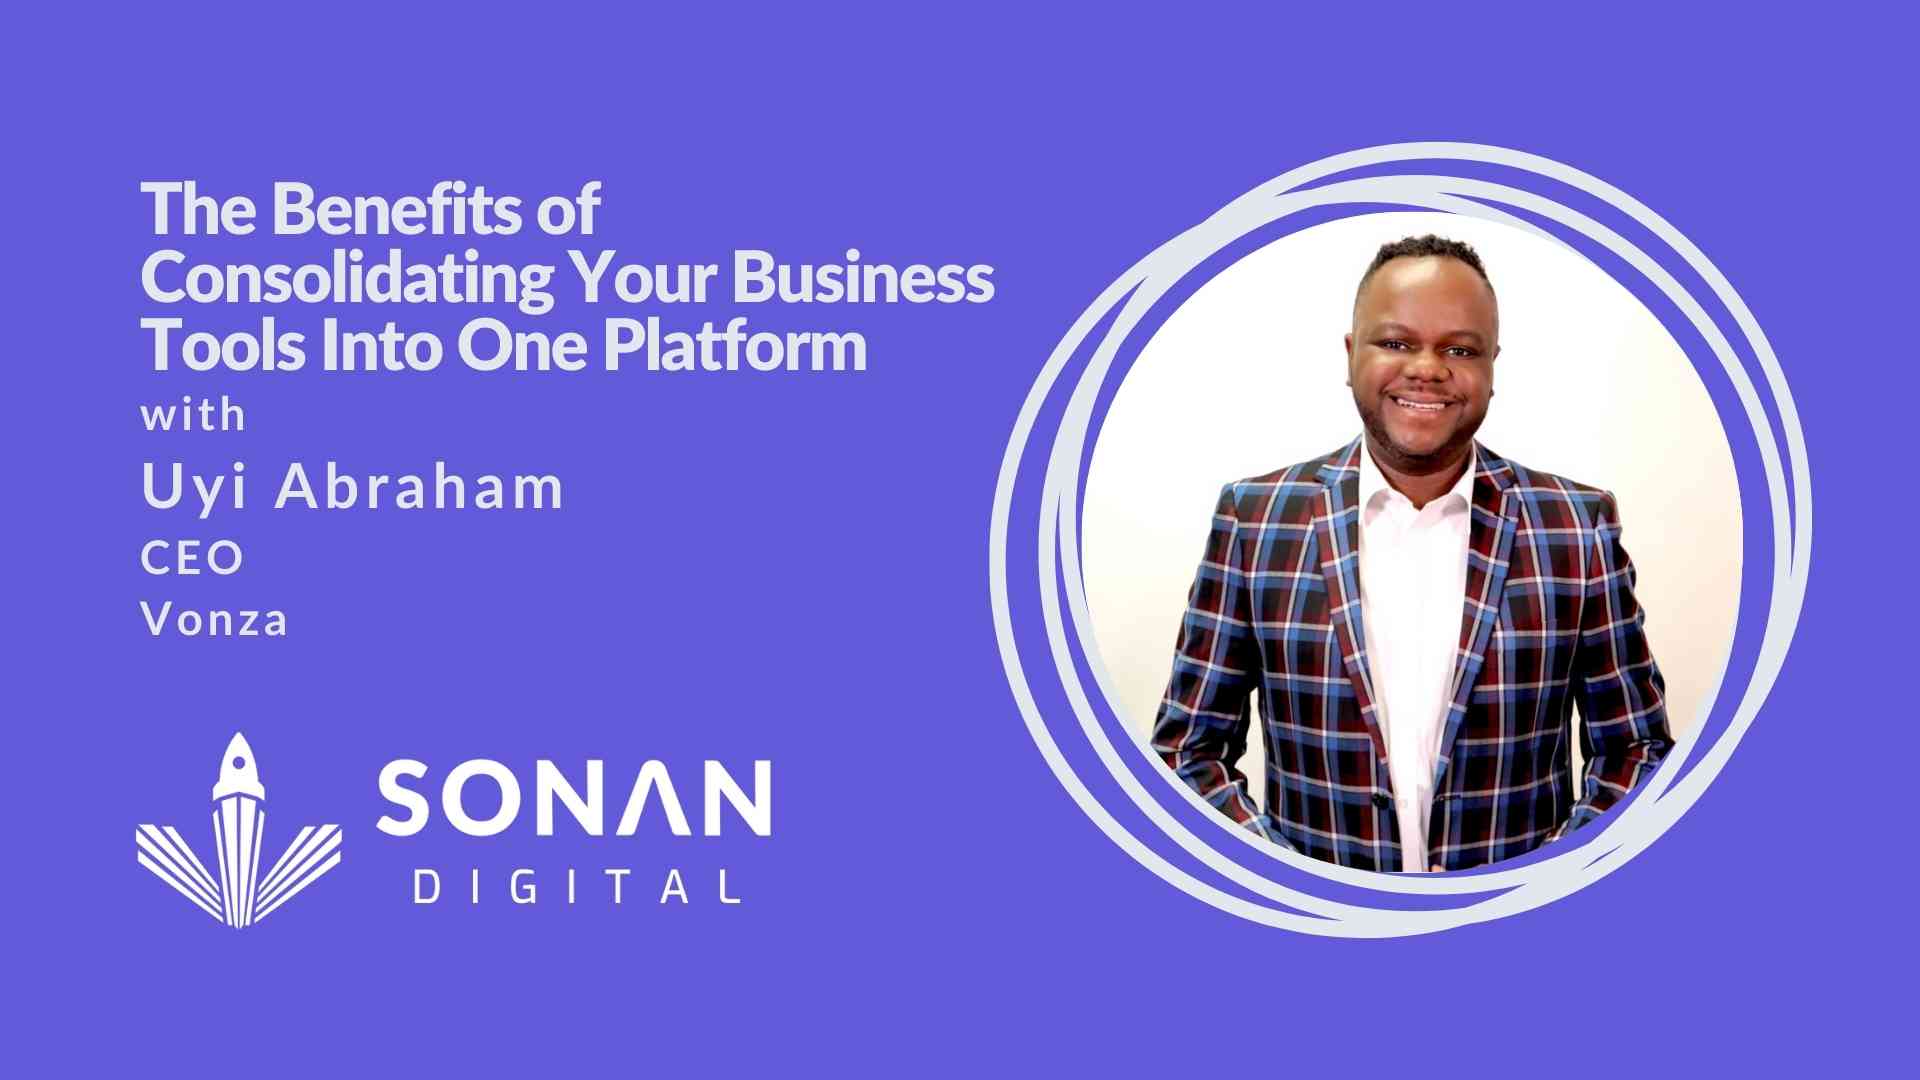 Vonza’s Uyi Abraham on the Benefits of Consolidating Your Business Tools Into One Platform